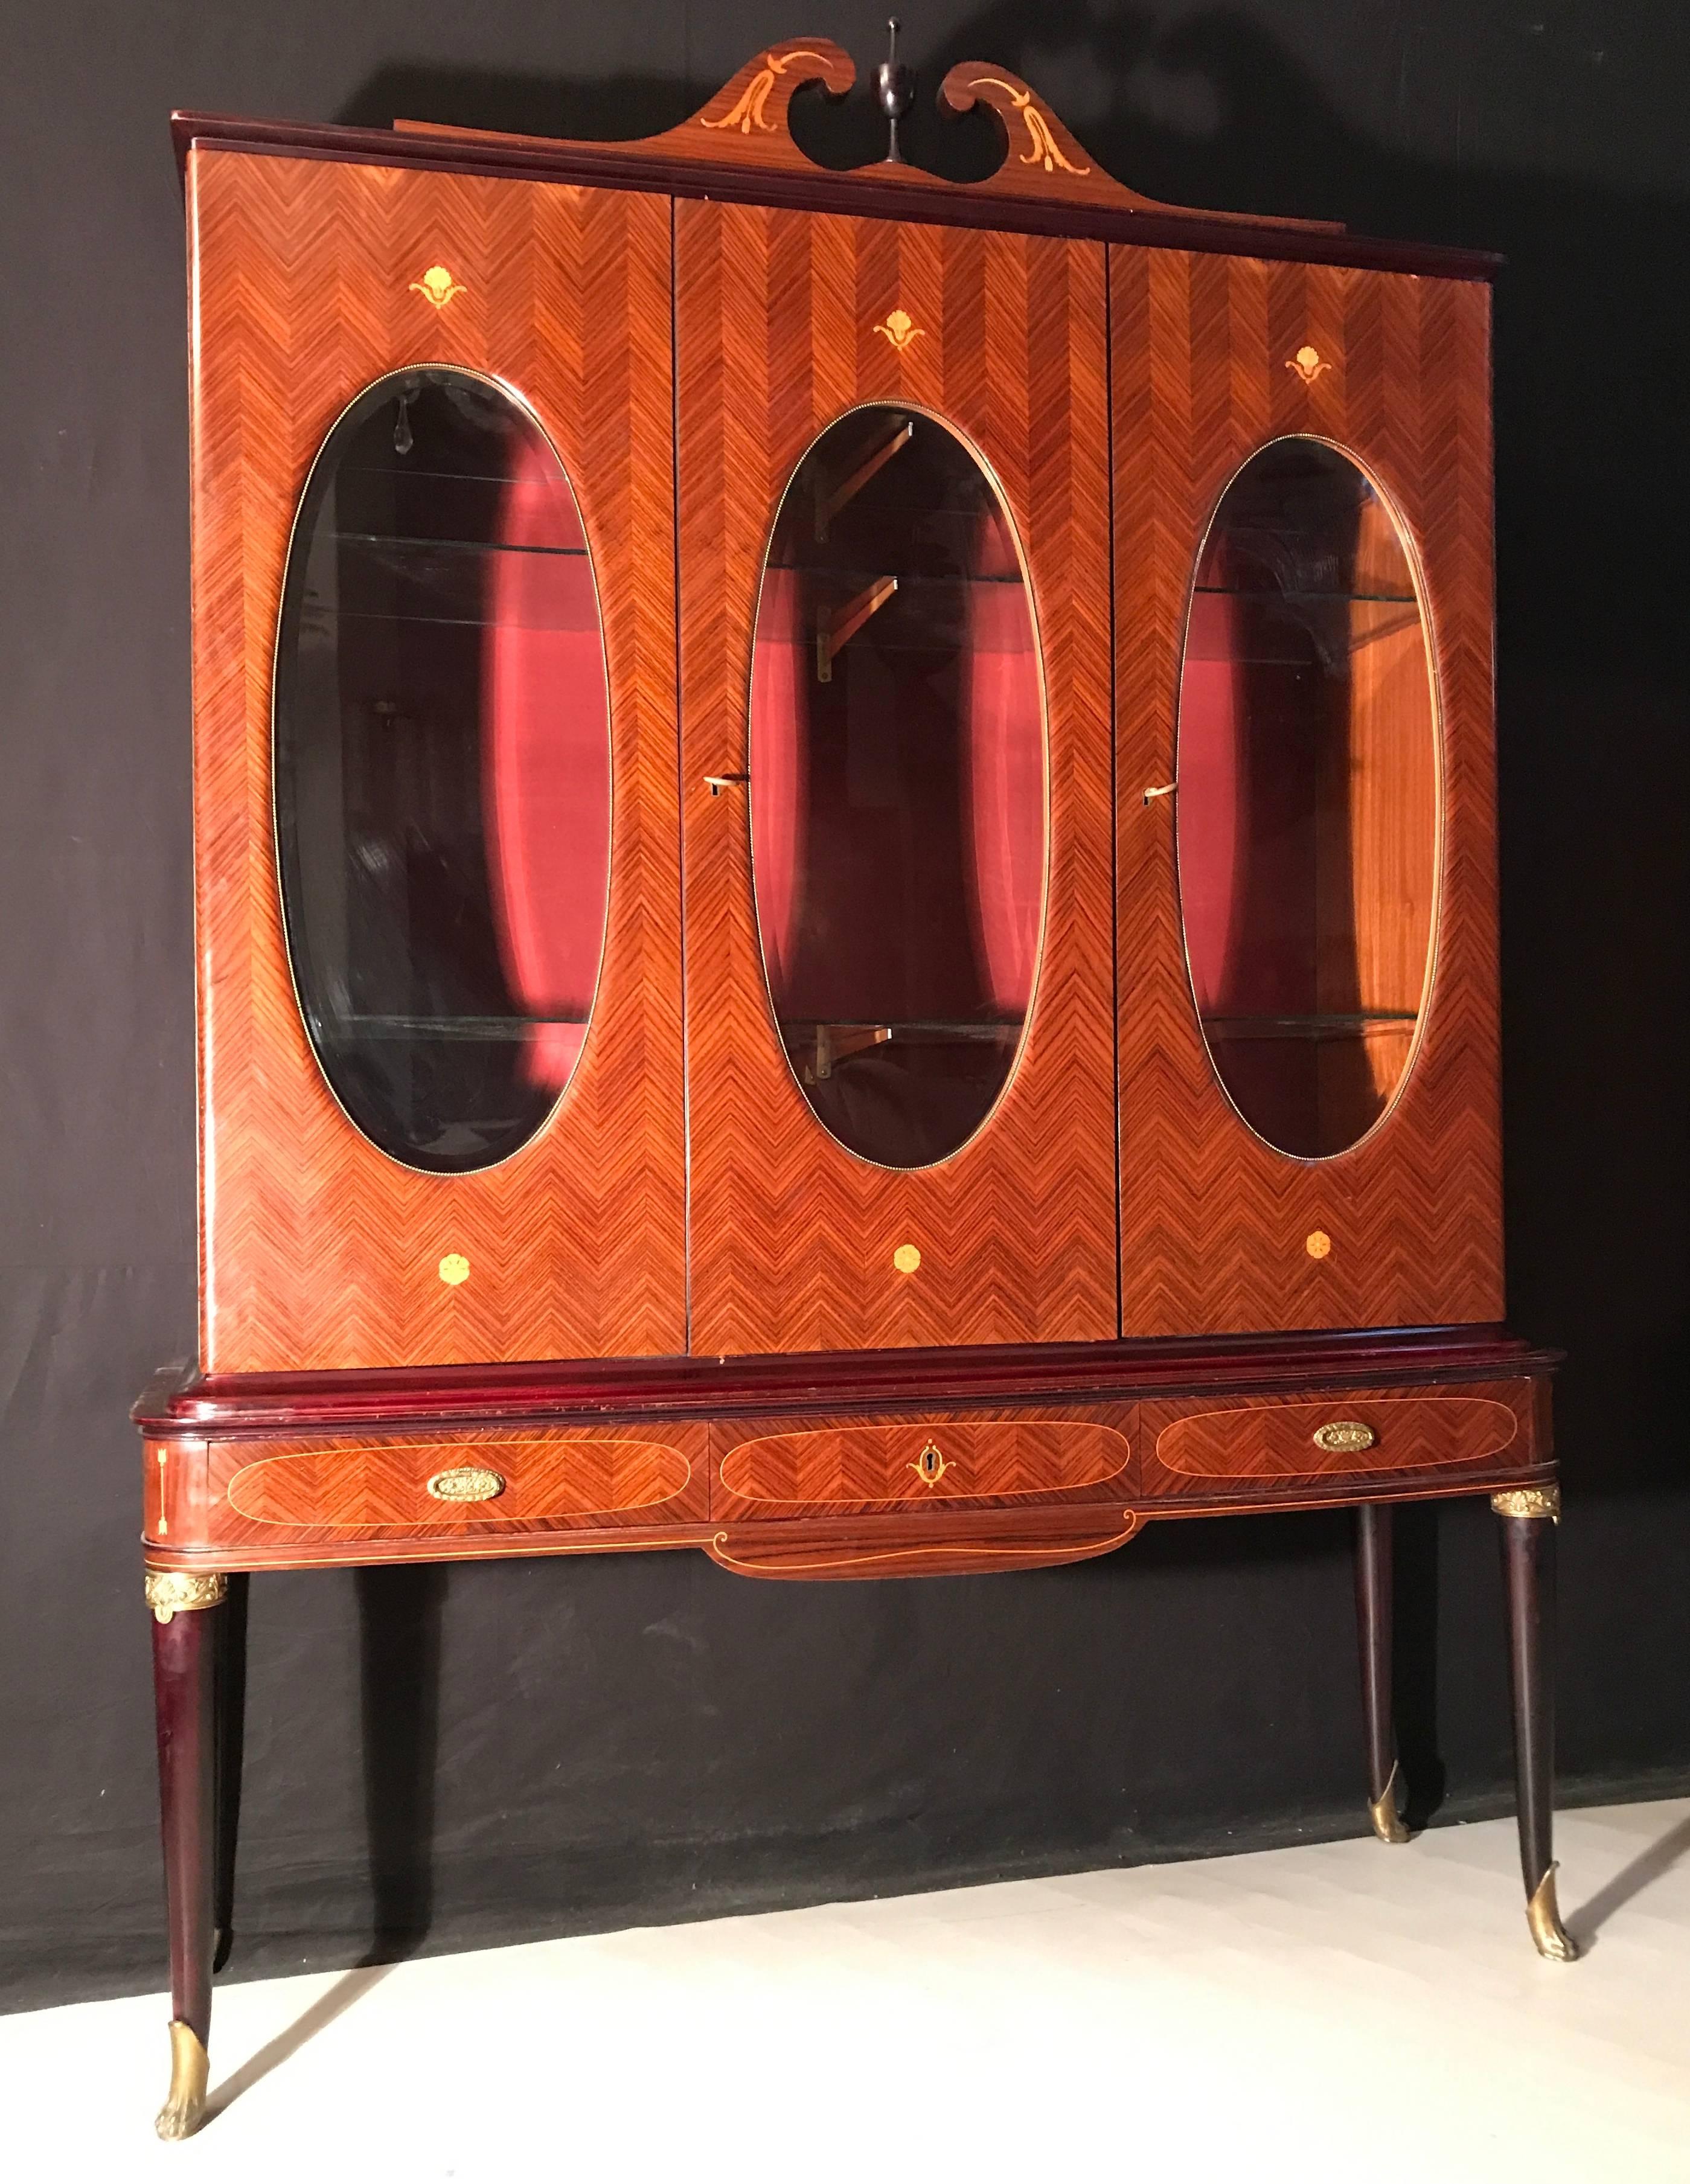 Ormolu-mounted, carved and inlaid with rare woods.
 